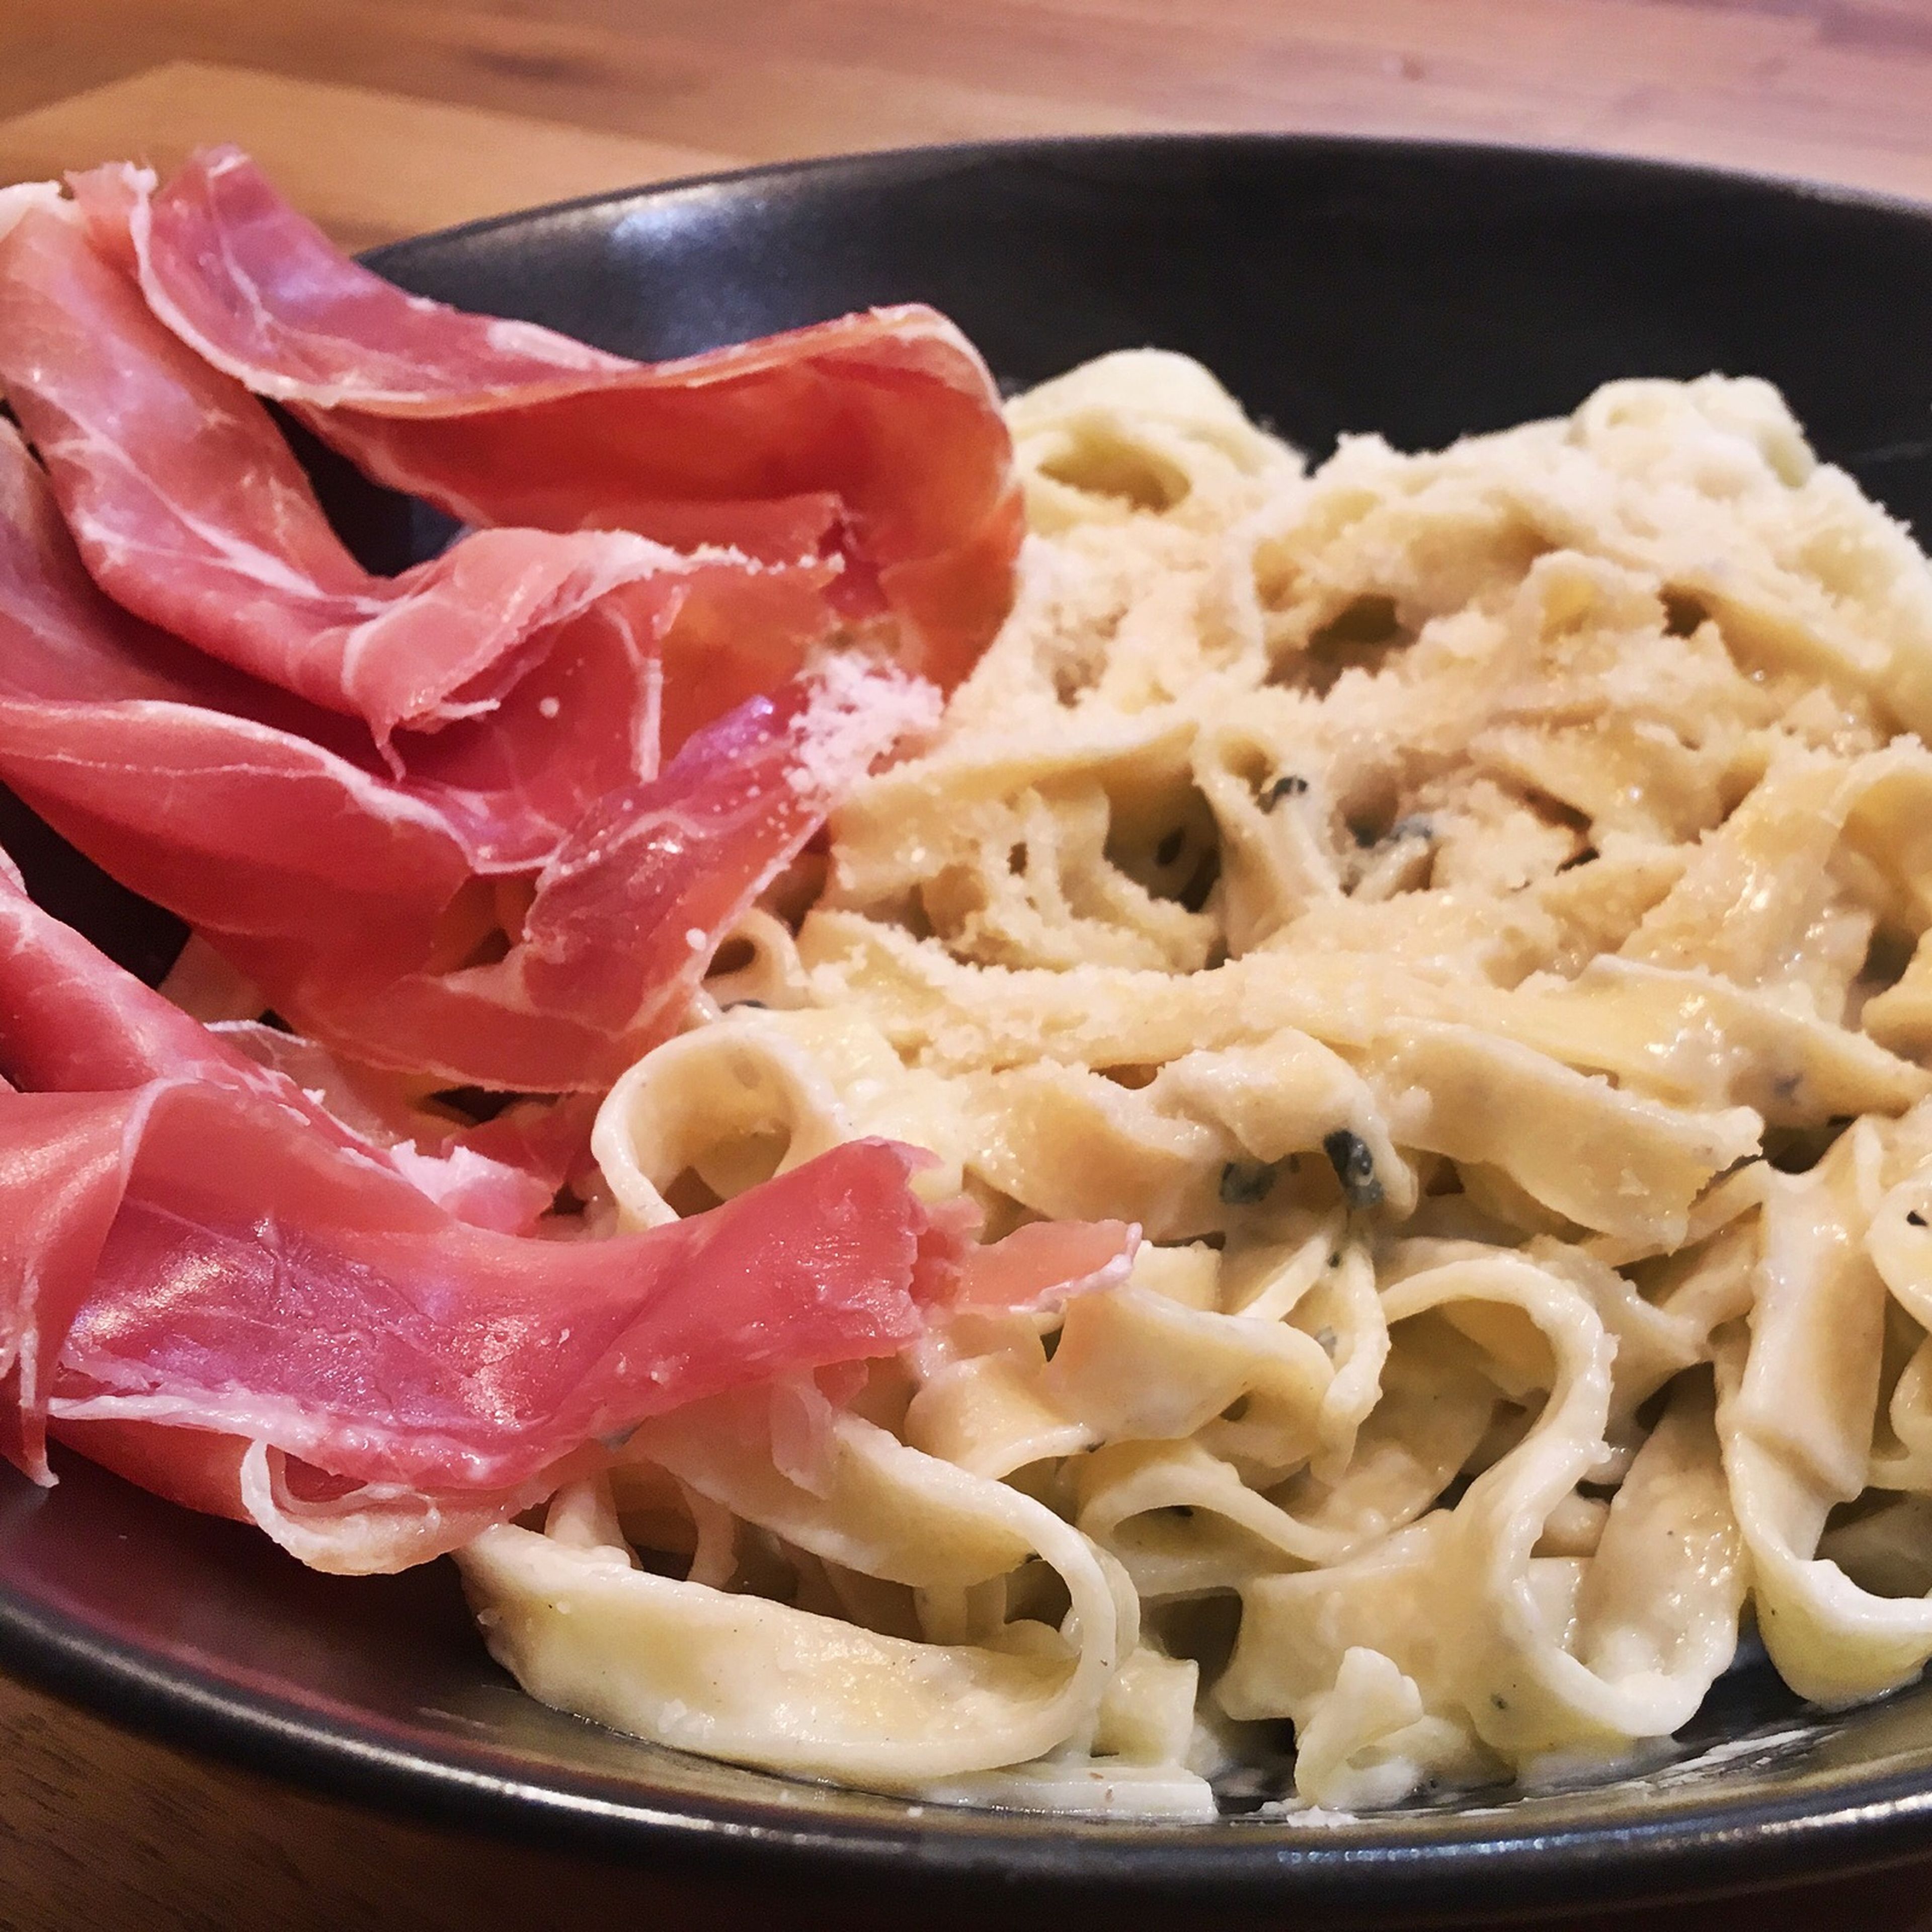 Pour the drained pasta into the cheese sauce and serve it in the plates. Then add some slices of Serrano ham and the crushed nuts. Enjoy!